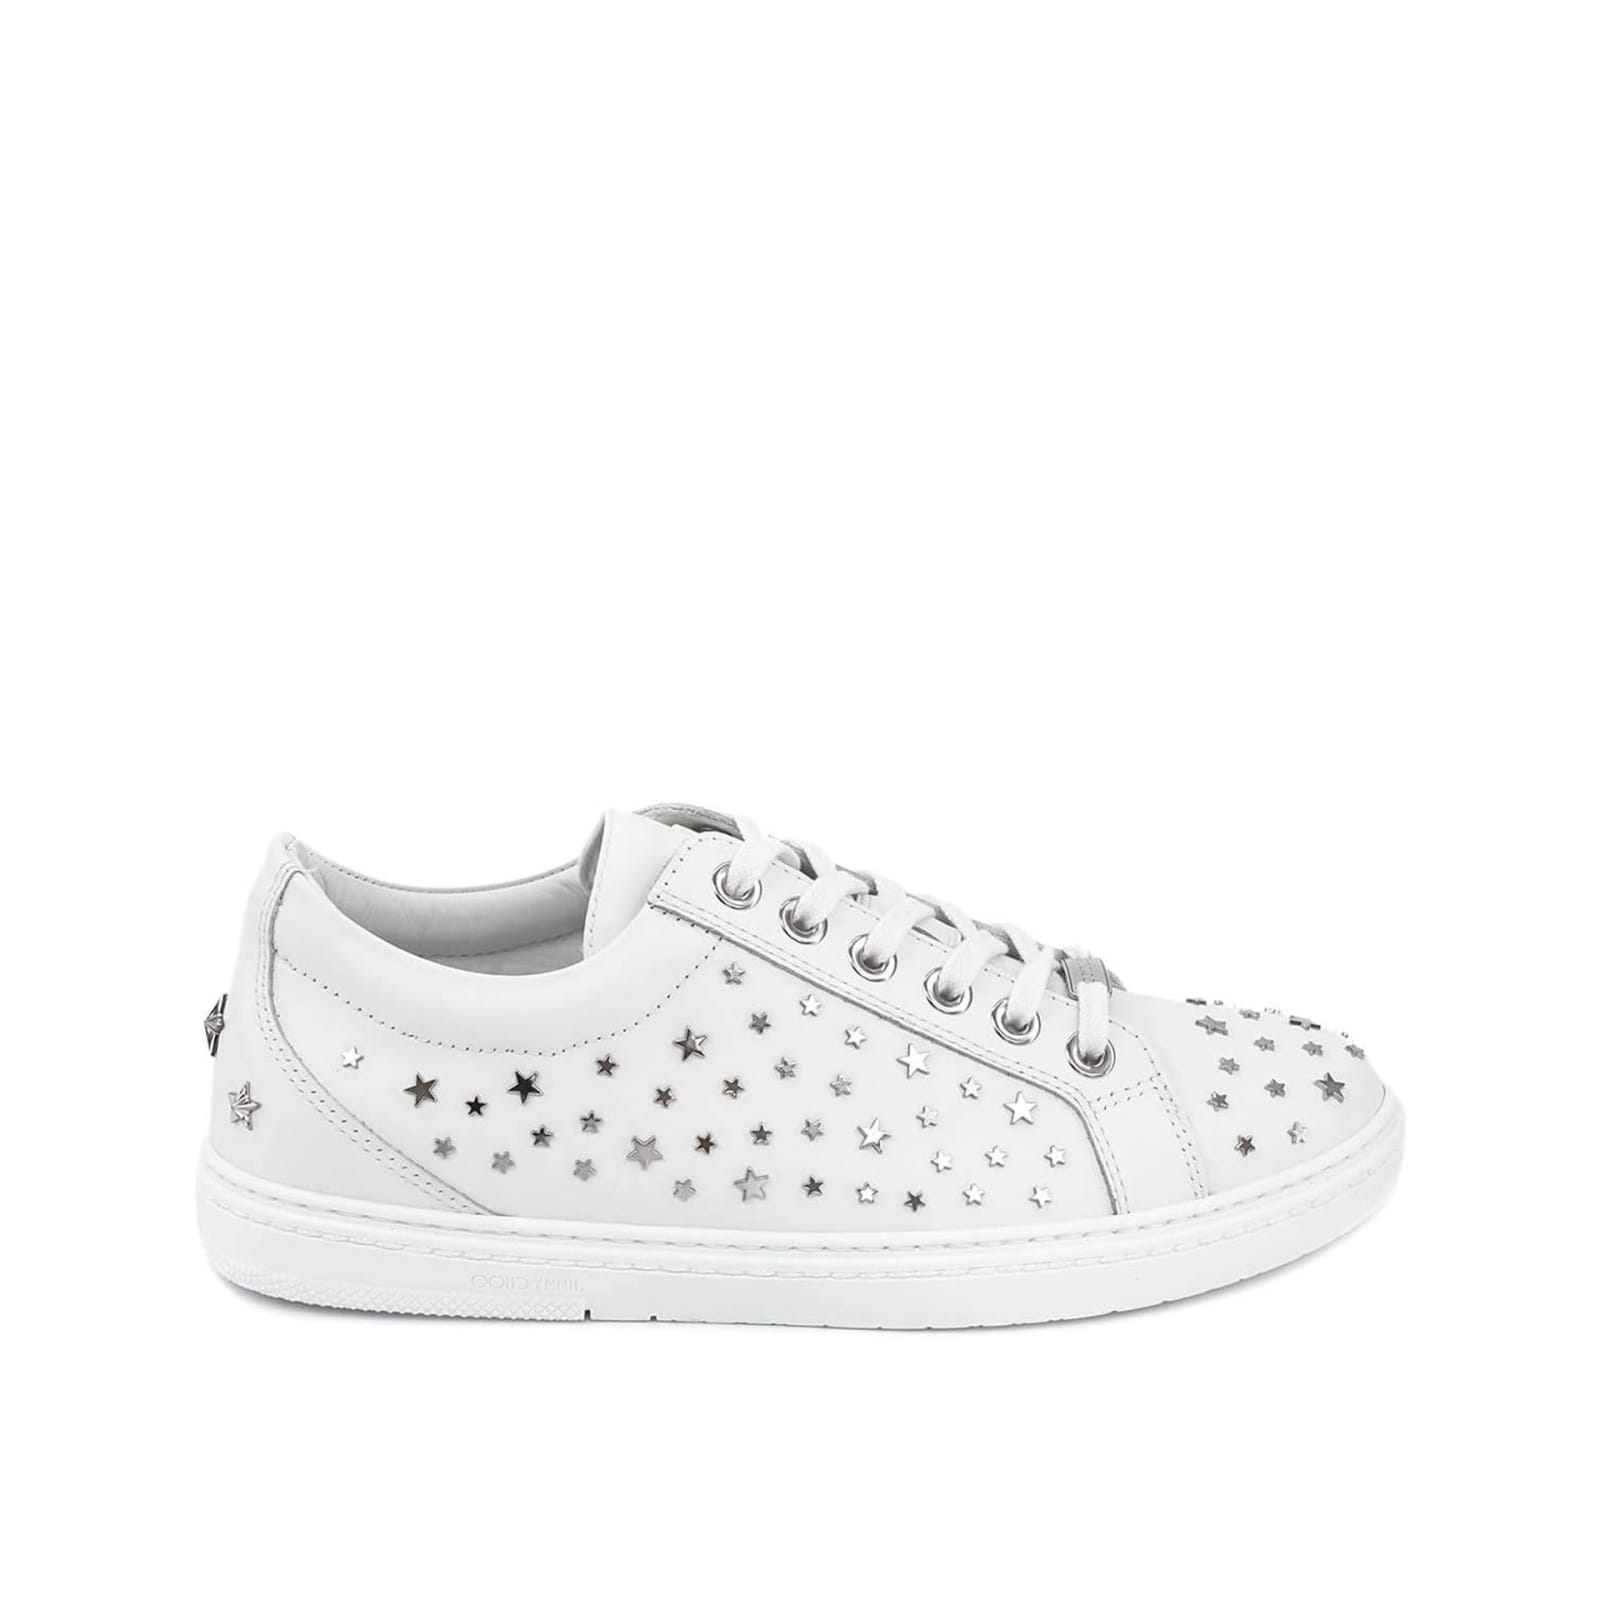 Cash Star Leather Sneakers